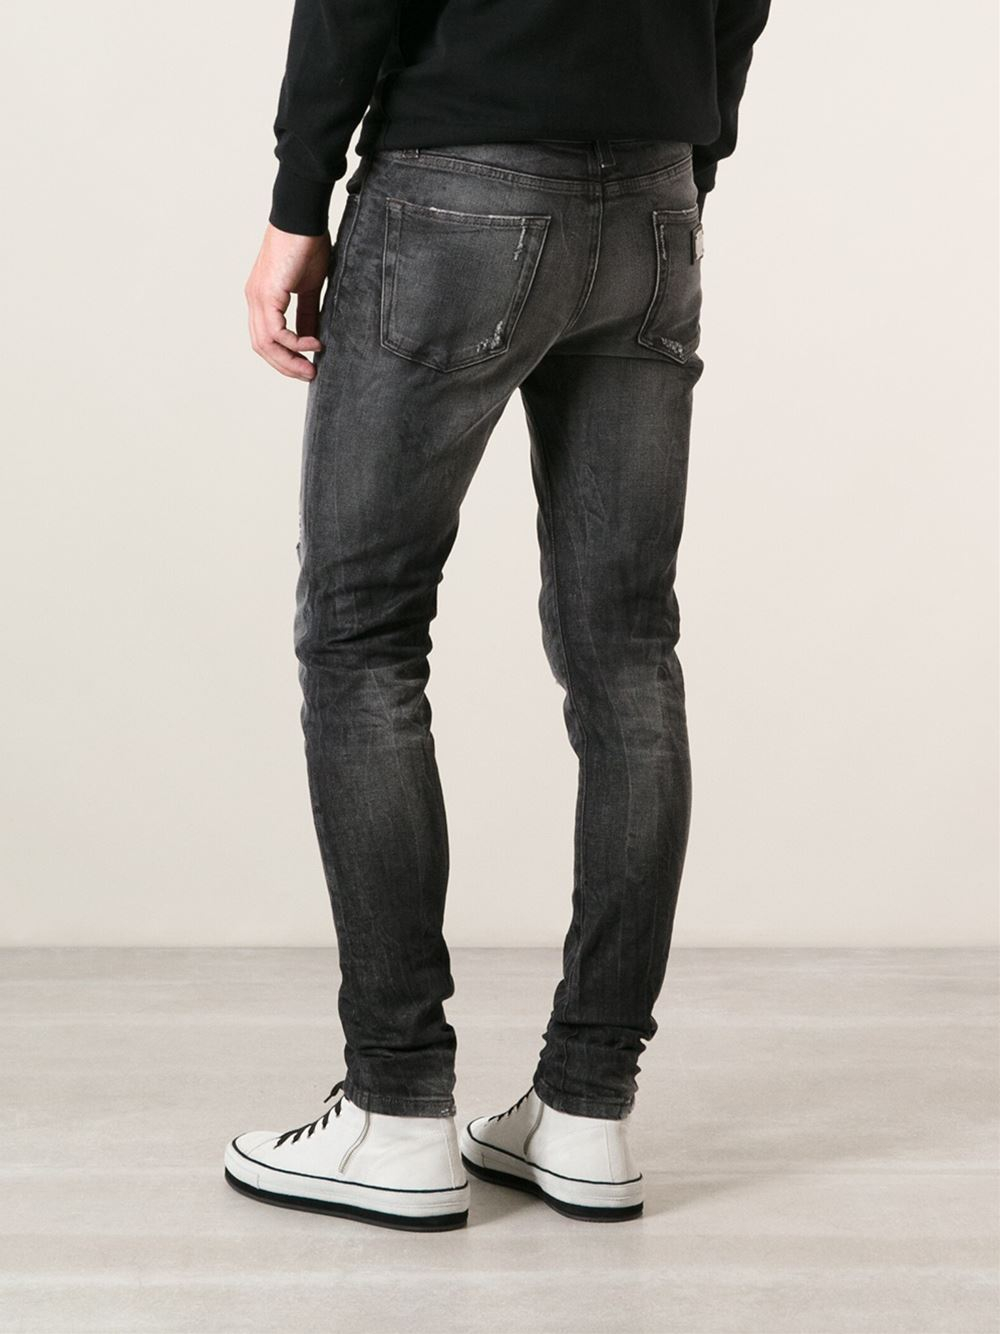 Dolce & Gabbana Distressed Skinny Jeans in Grey (Gray) for Men - Lyst